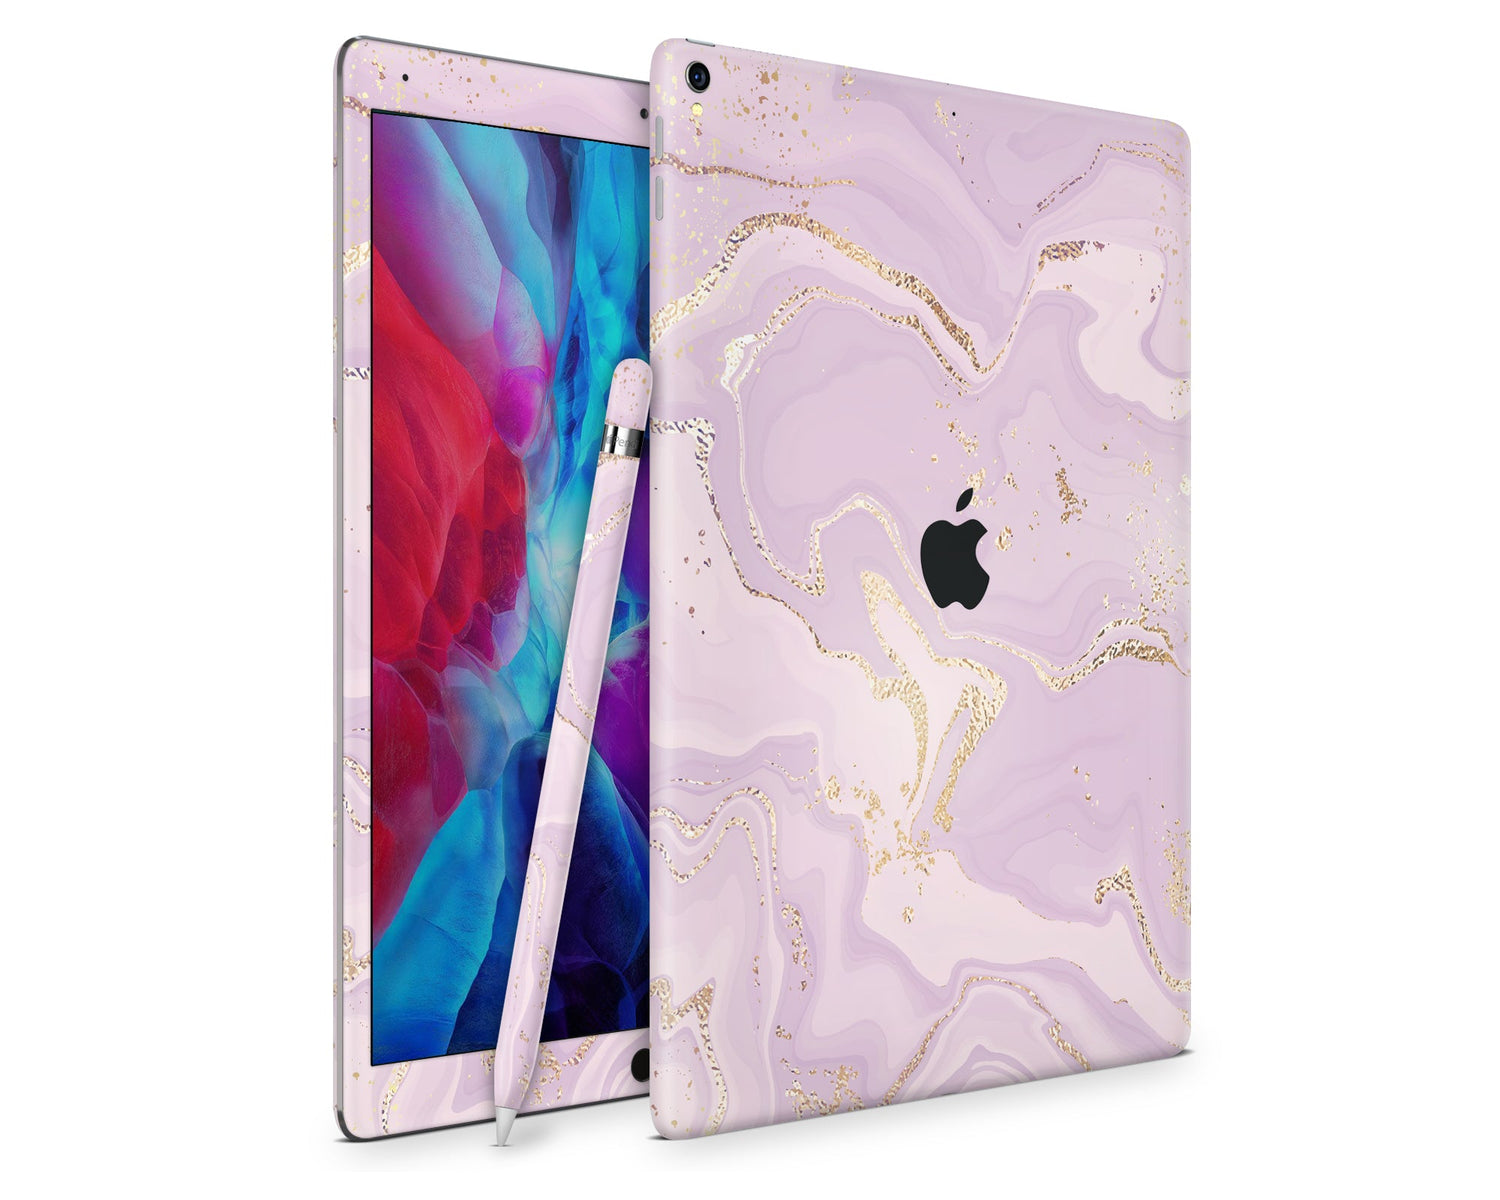 Lux Skins iPad Ethereal Lavender Gold Marble iPad Pro 12.9" Gen 5 Skins - Pattern Marble Skin